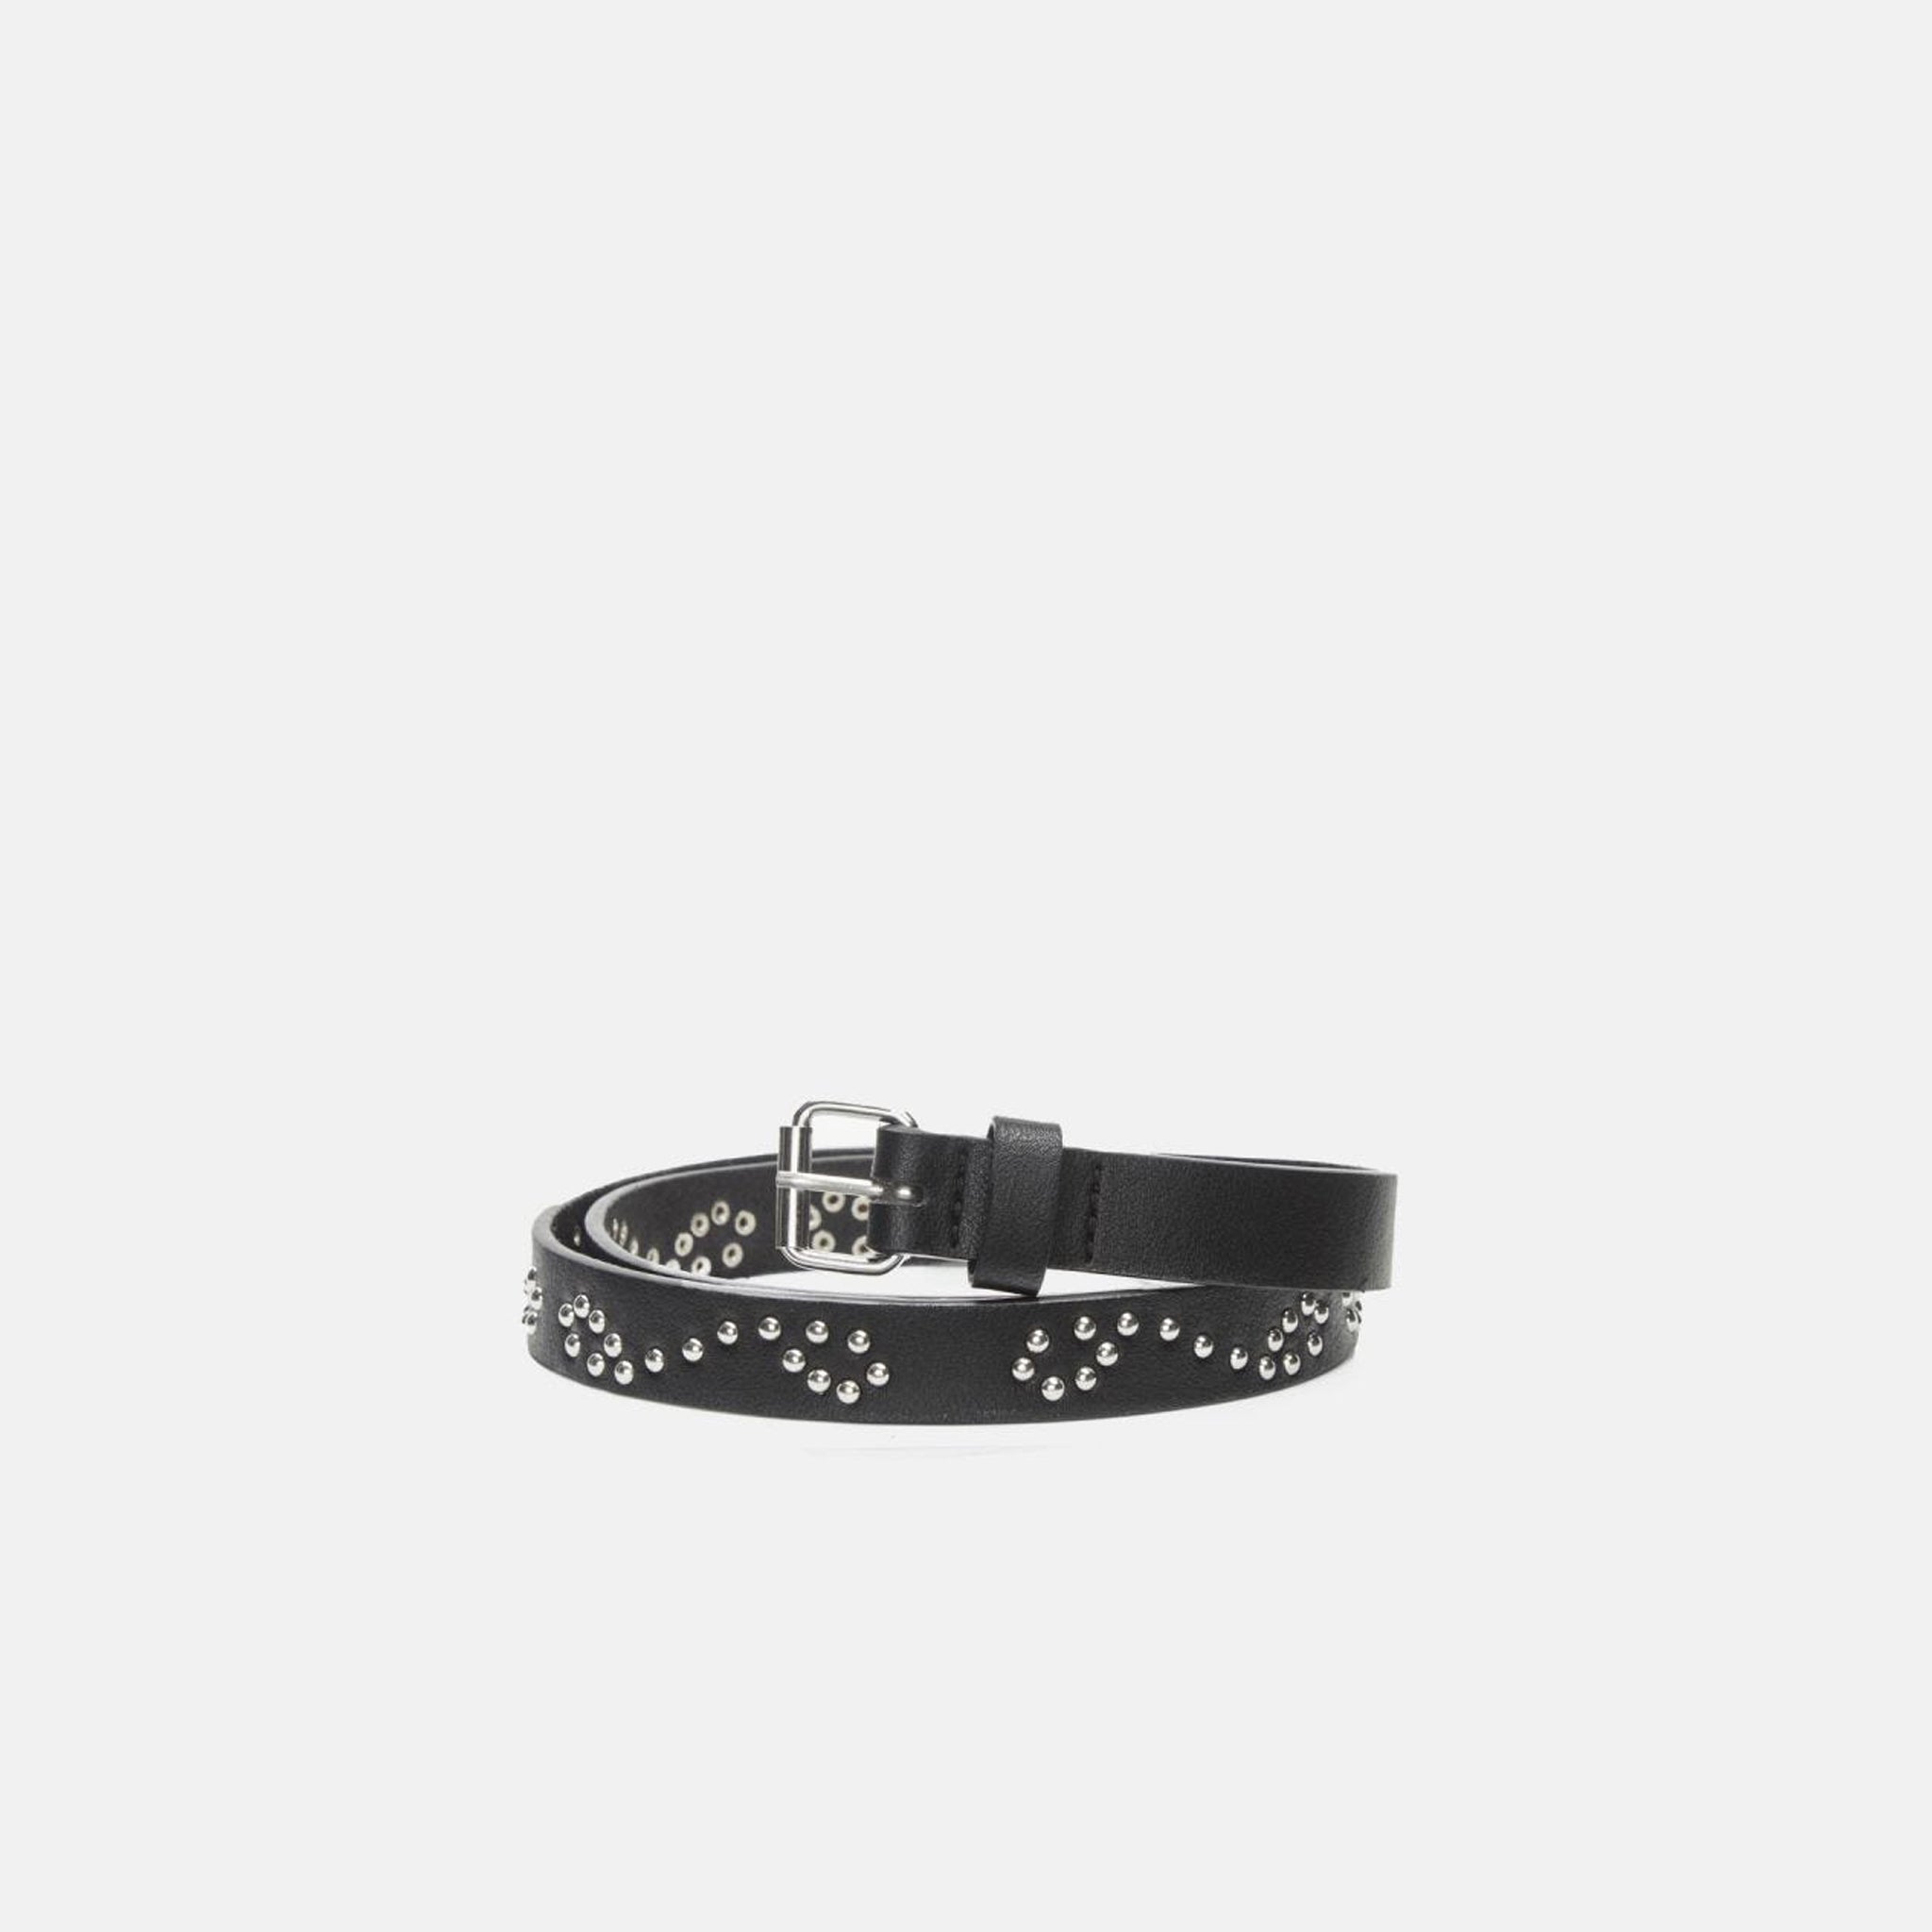 A Fastlane Studded Belt - Black with silver studded details by Fabienne Chapot.